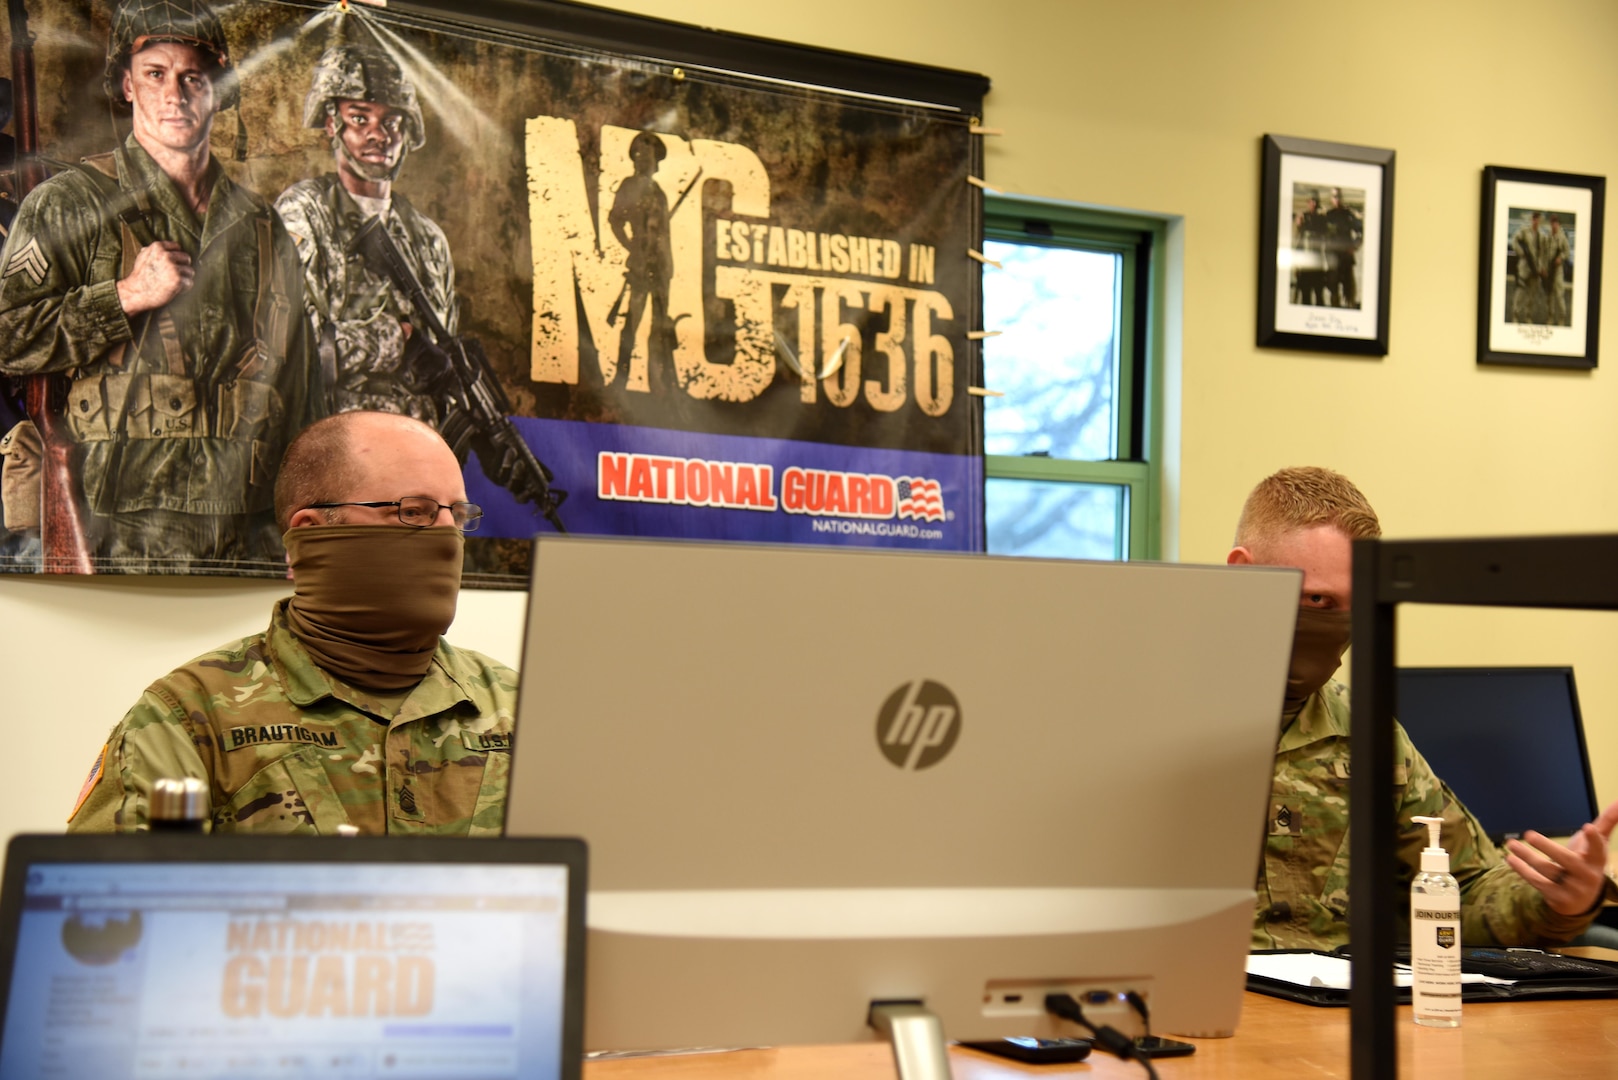 Sgt. First Class Jason Brautigam, left, and Staff Sgt. Michael Perry, recruiting and retention noncommissioned officers, Michigan Army National Guard, conduct a question-and-answer session via the internet due to social distancing restrictions caused by the COVID-19 pandemic, Dowagiac, Michigan, April 24, 2020.